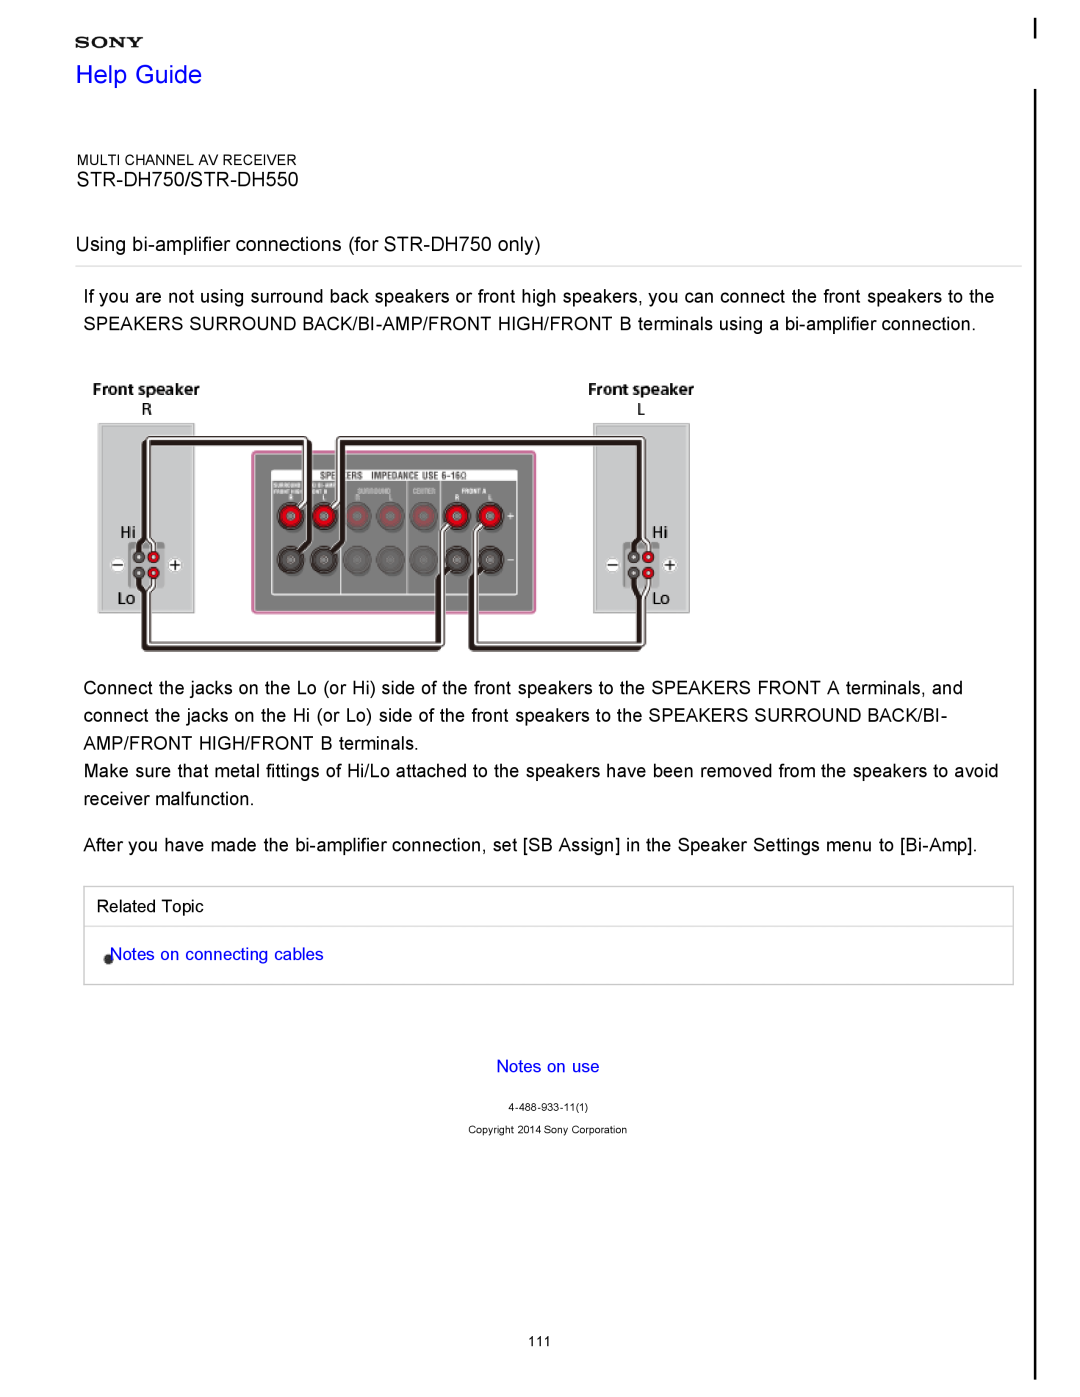 Sony manual Using bi-amplifierconnections for STR-DH750only, Help Guide, STR-DH750/STR-DH550, Multi Channel Av Receiver 